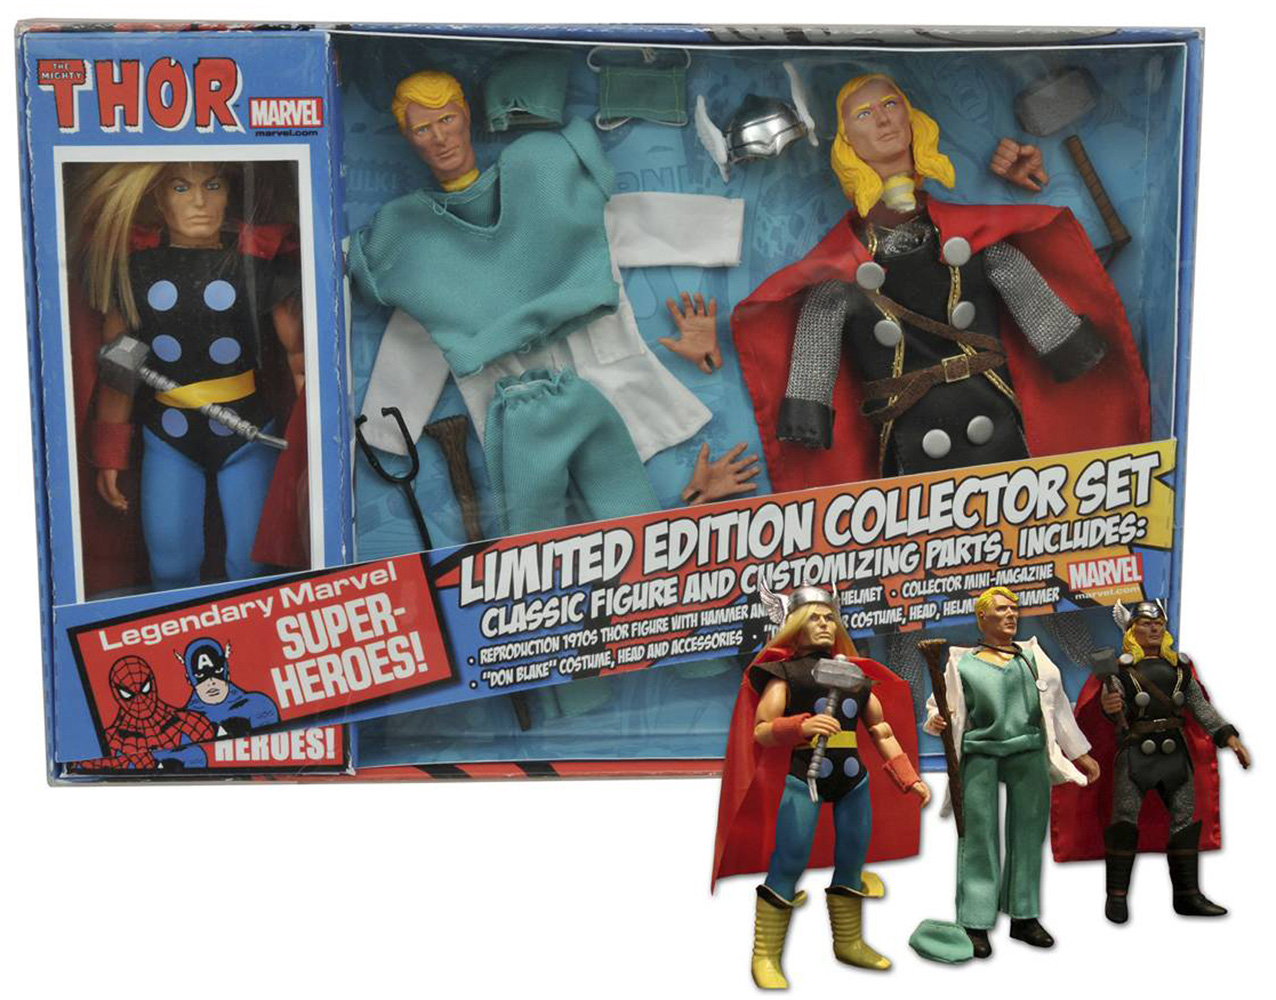 Image: Legendary Marvel Super-Heroes Limited Edition Collector Set: Thor  - 